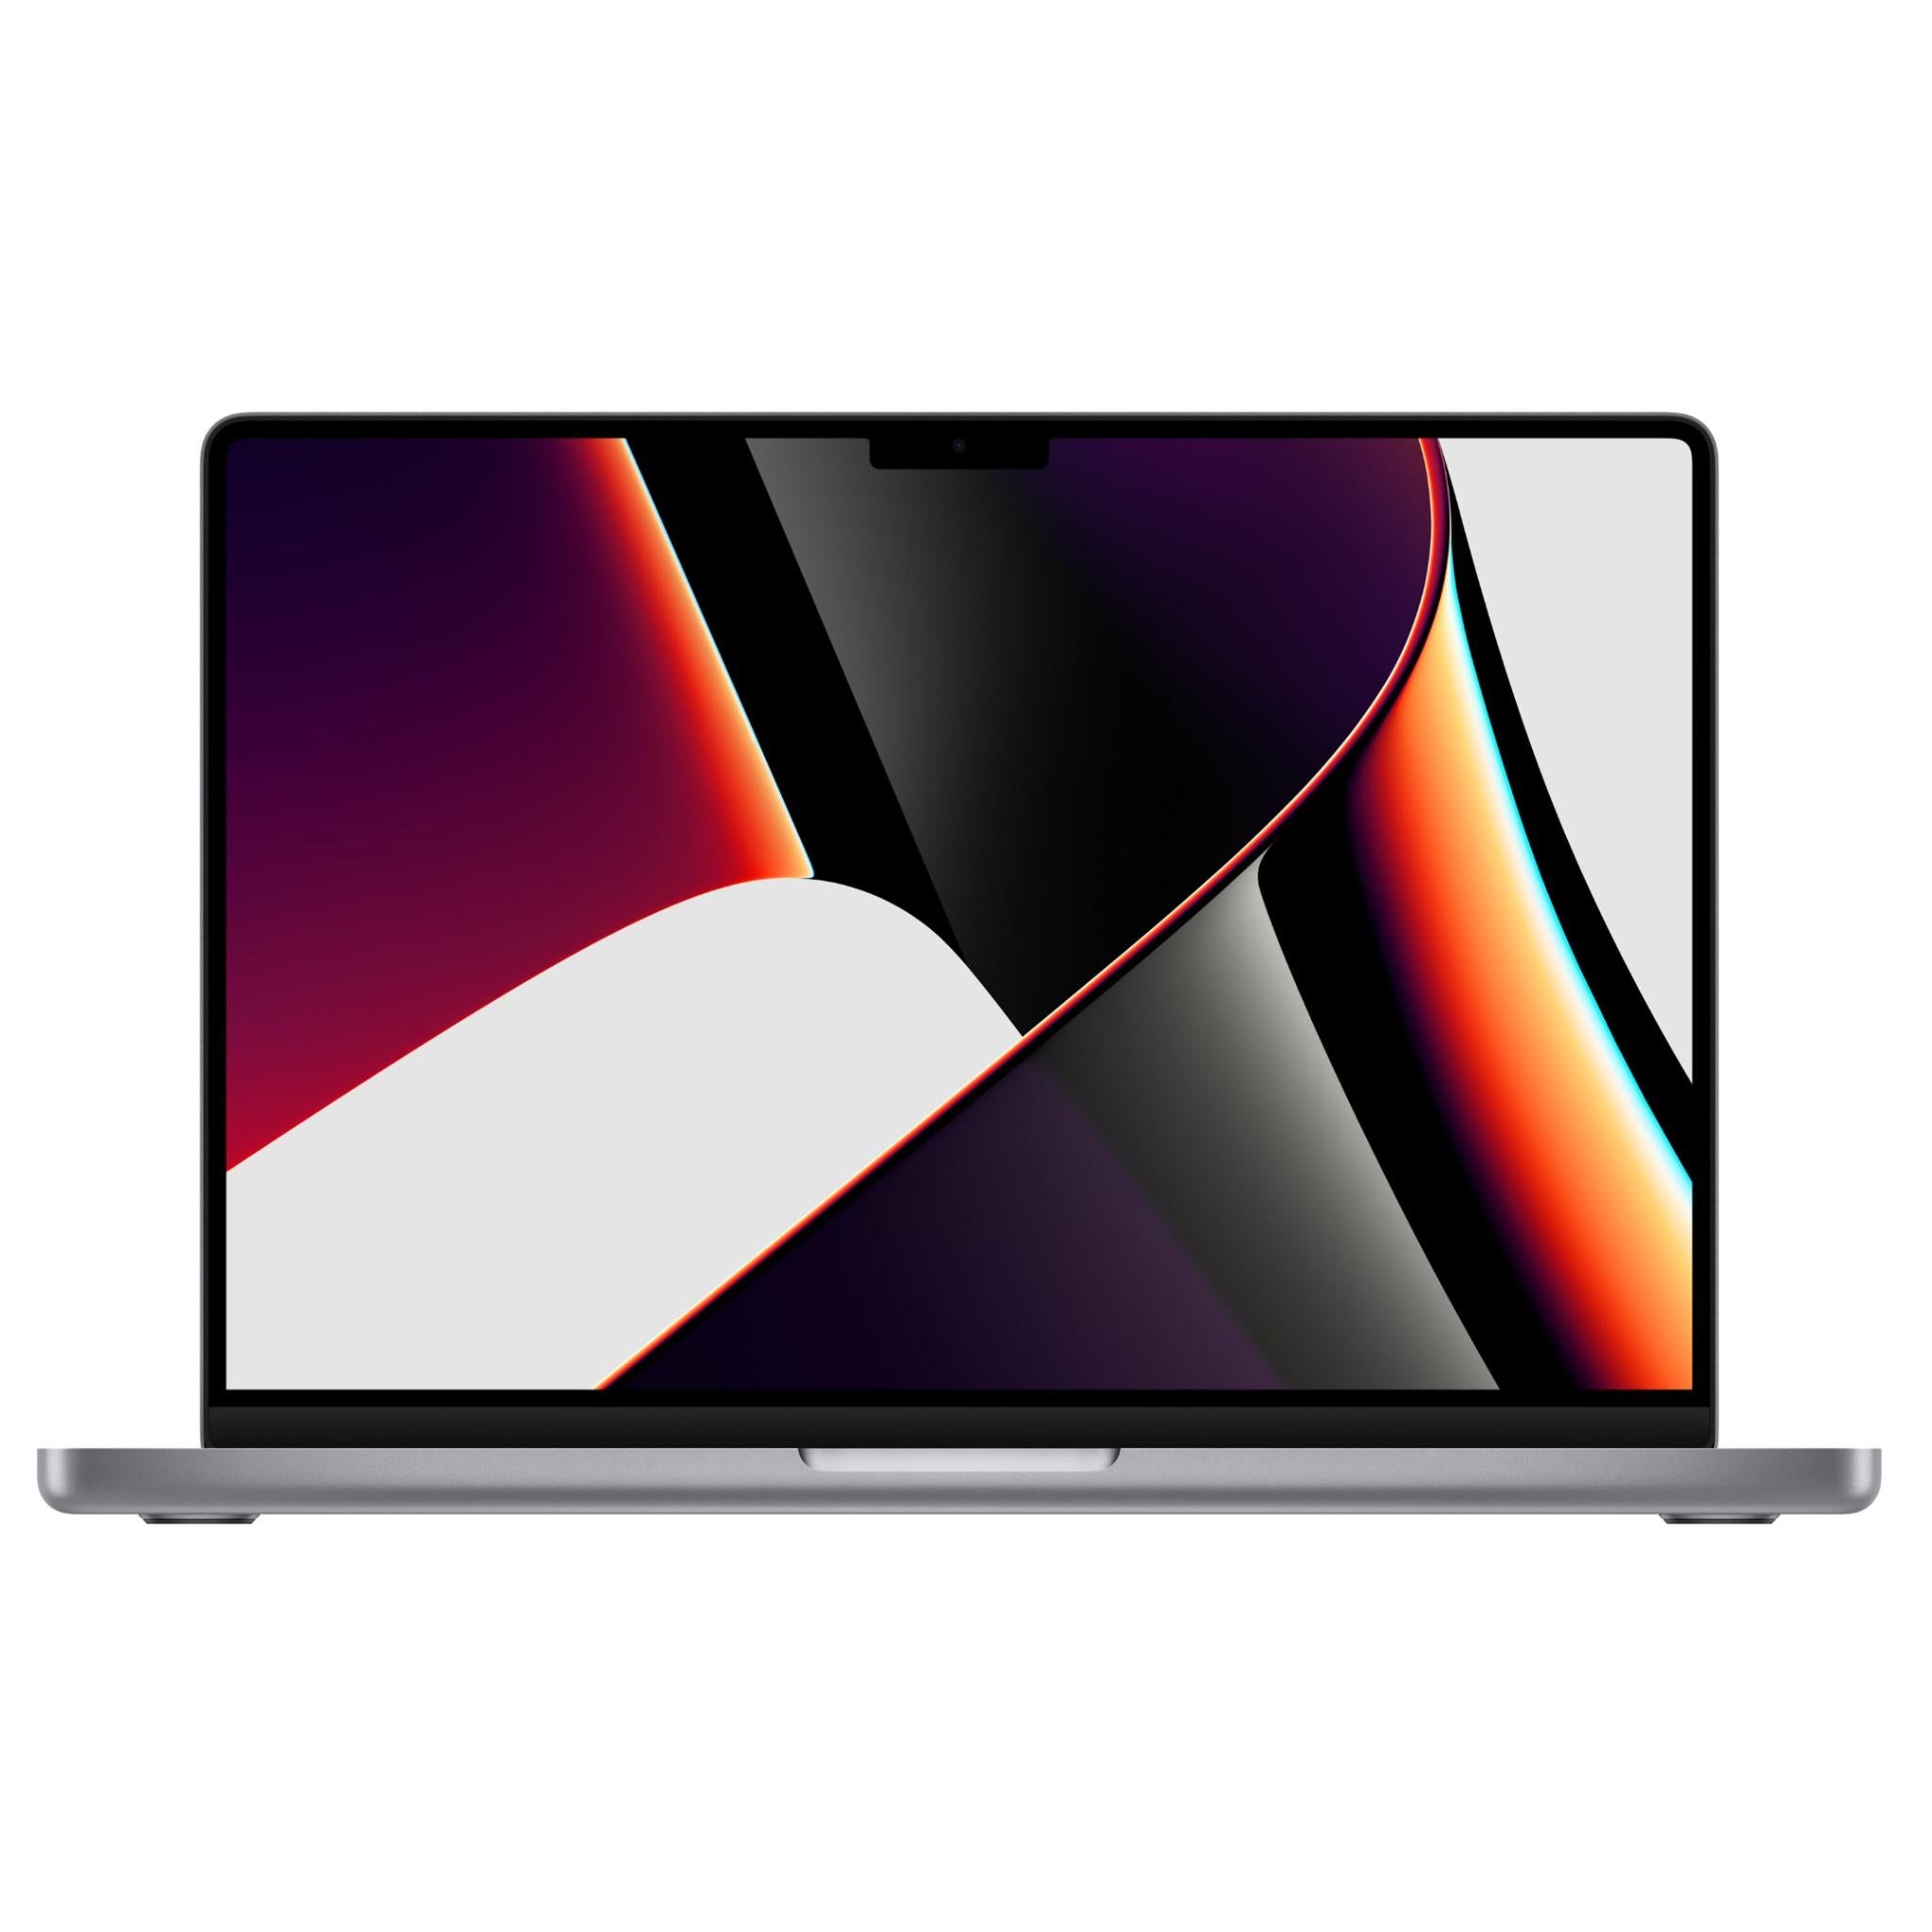 apple macbook pro 14-inch with m1 pro chip 1tb ssd (space grey/2021) [^renewed]